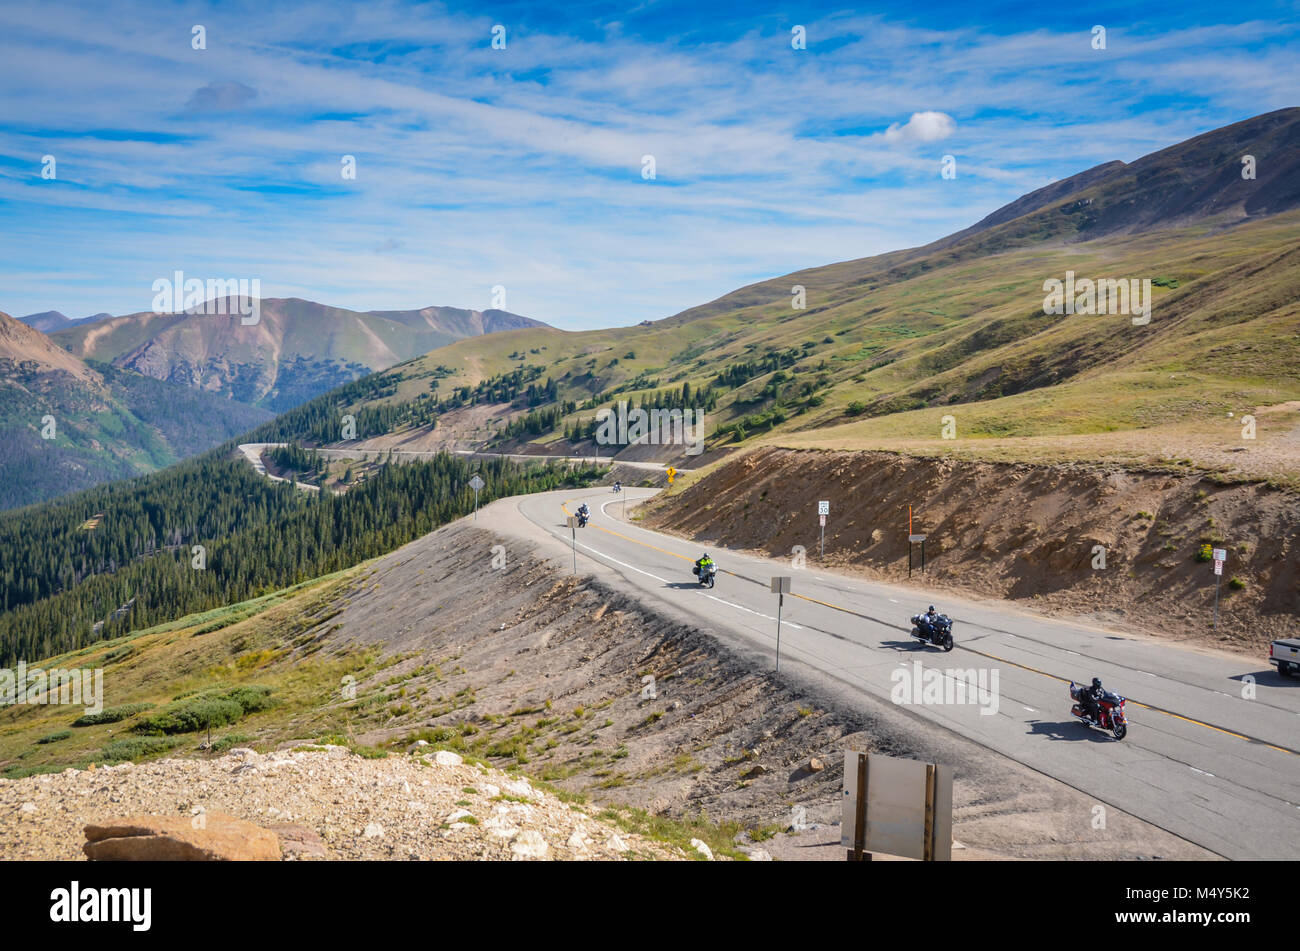 Motorcycles touring on road at Loveland Pass amidst Rocky Mountains in Colorado, USA. Stock Photo